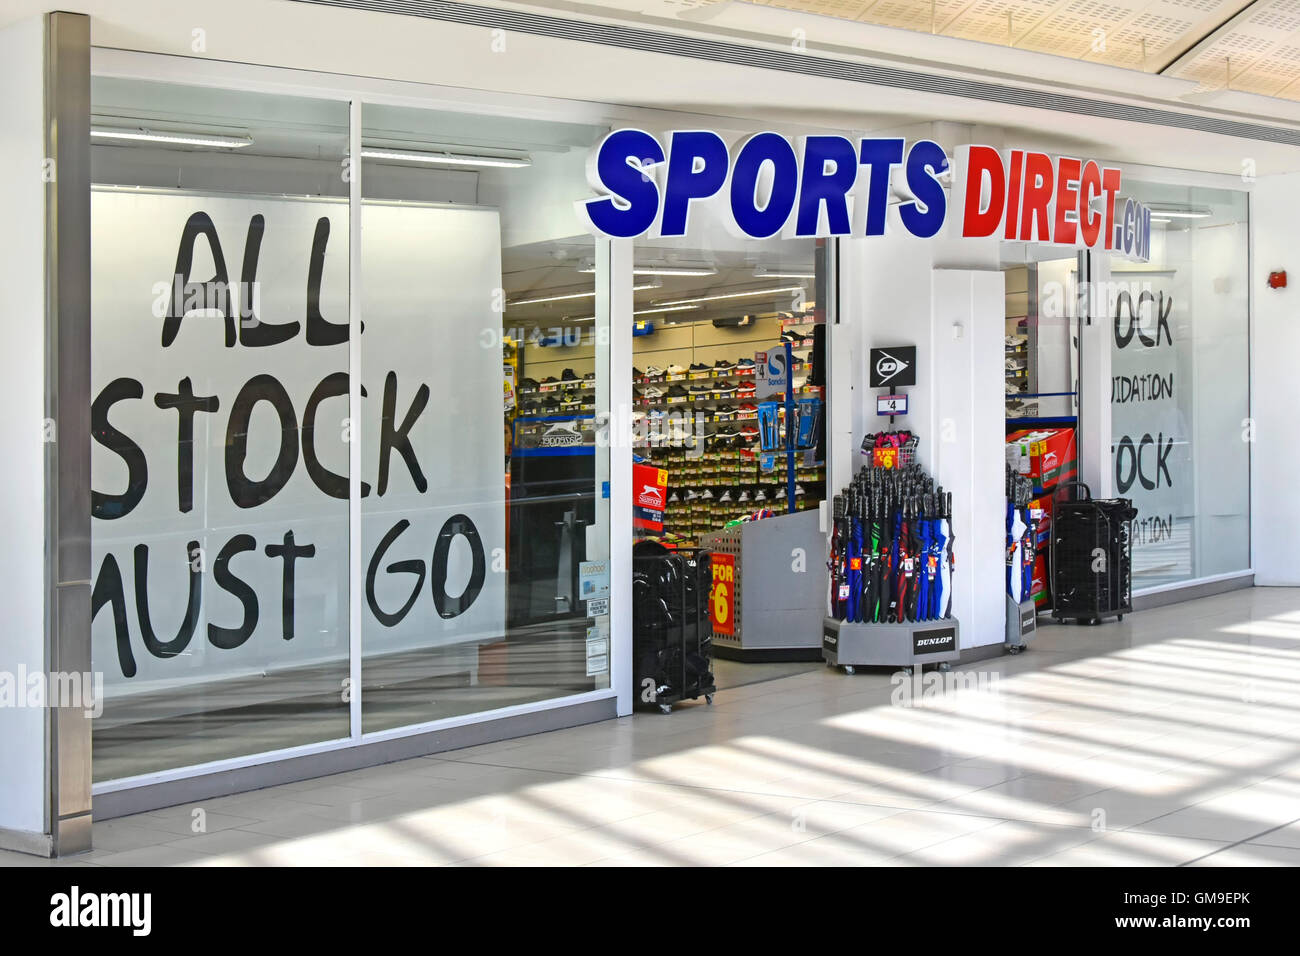 Sports Direct shop front indoor shopping Mall 'All Stock Must Go' slogan banners in store window at Intu Lakeside shopping centre Thurrock Essex UK Stock Photo